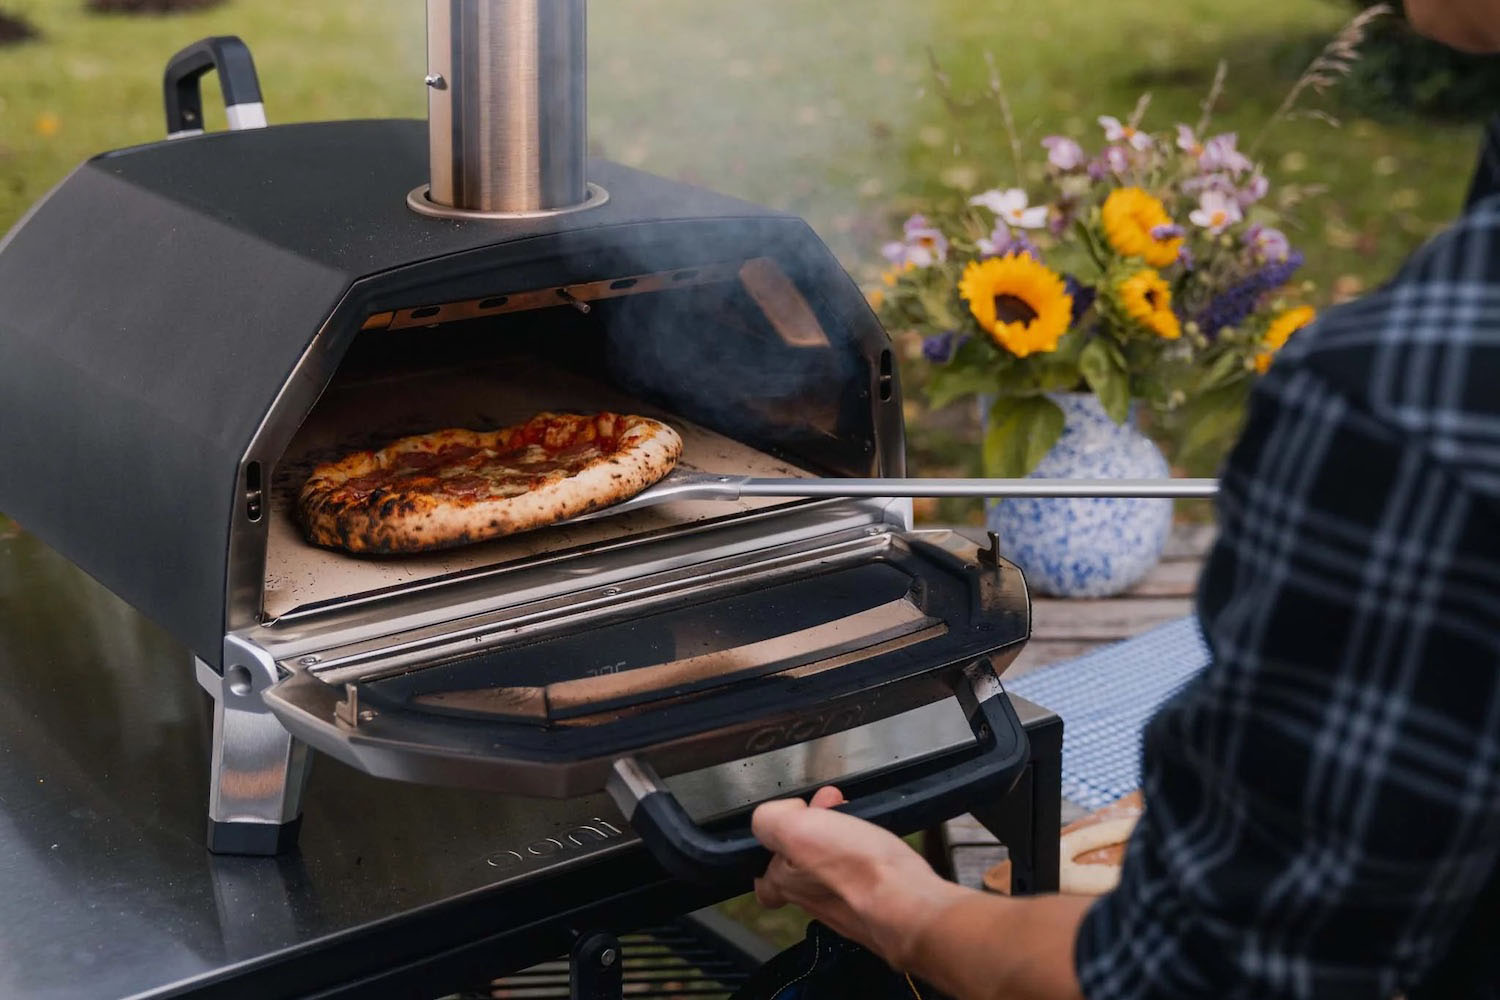 Ooni's Taking 30% Off All Their Pizza Ovens for Black Friday - InsideHook